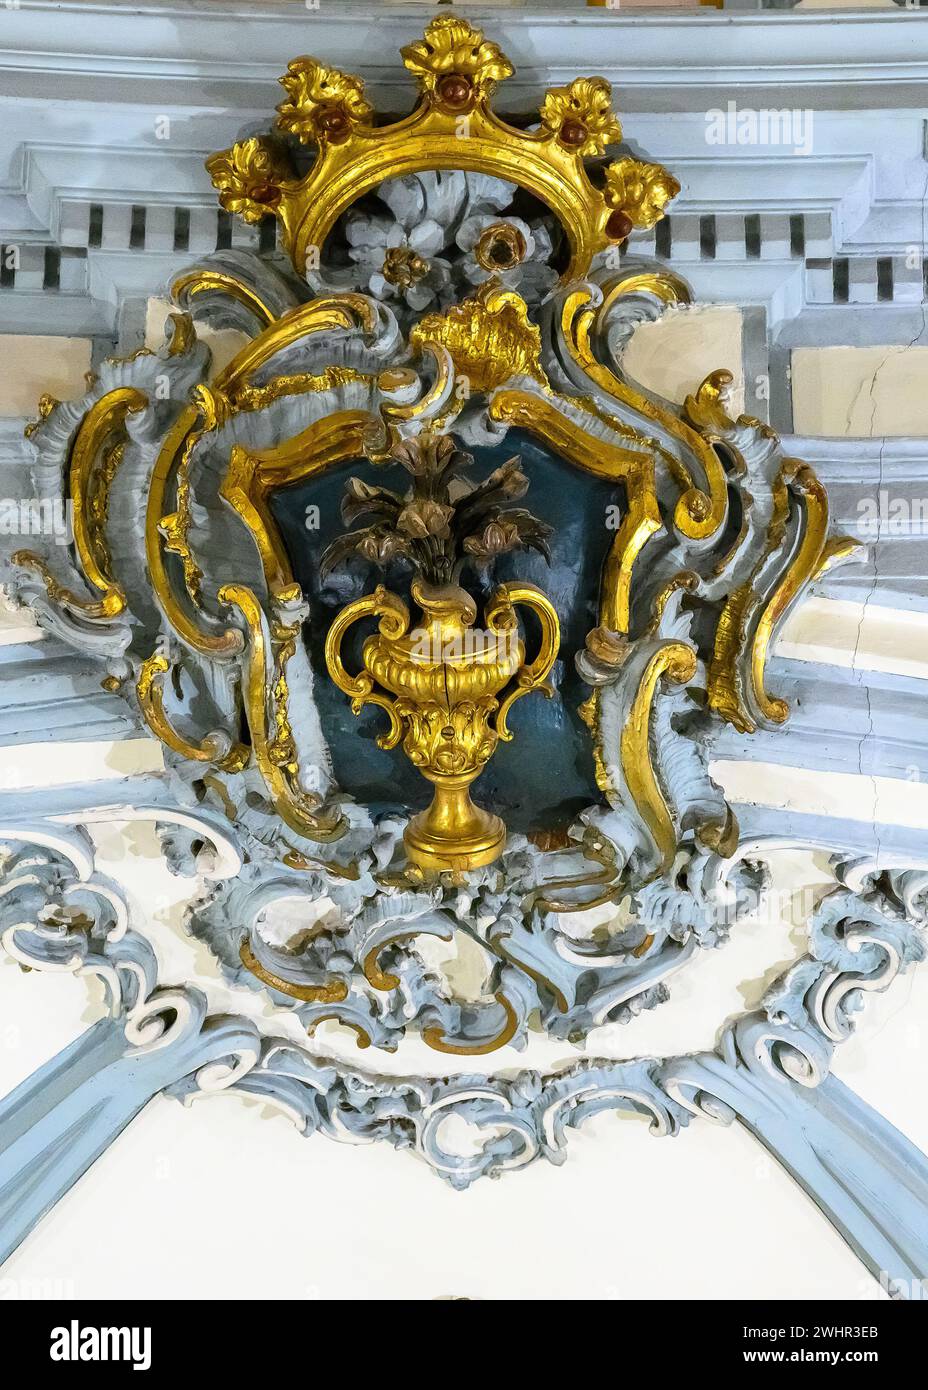 Decoration symbol with royal crown in the border of the dome or cupola. Interior architectural feature of the Museum Church Saint John of God Stock Photo